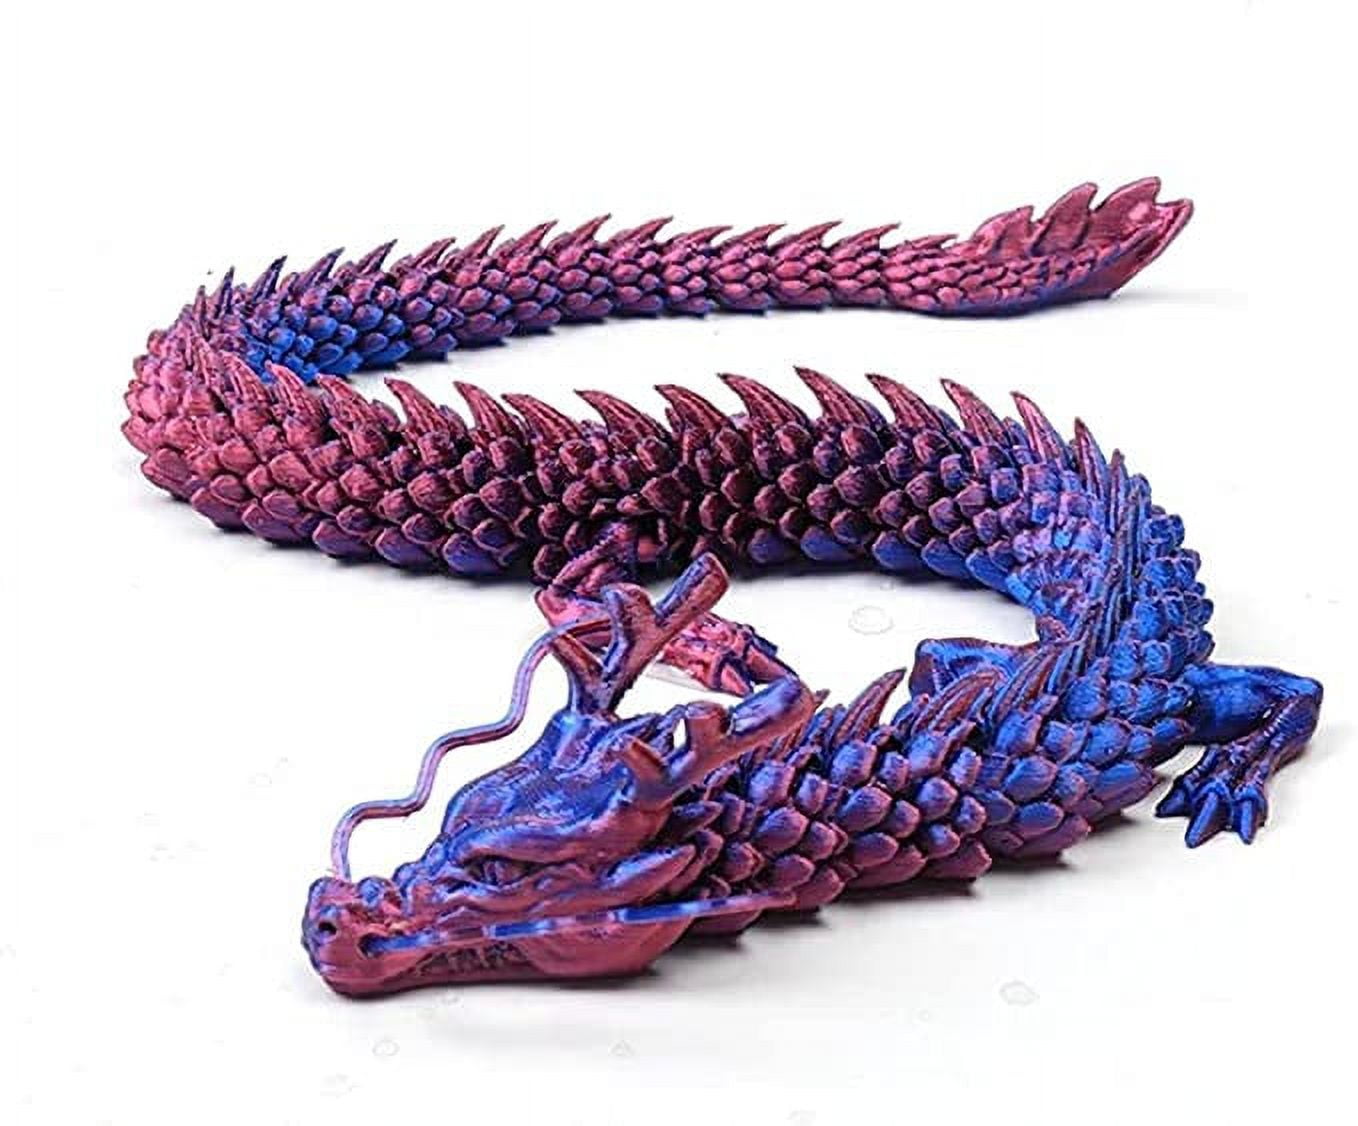 3D Printed Articulated Dragon, Rotatable and Posable Dragon Model Figures,  Articulated 3D Printed Dragon Gift for Dragon Lovers-18.5 Inch